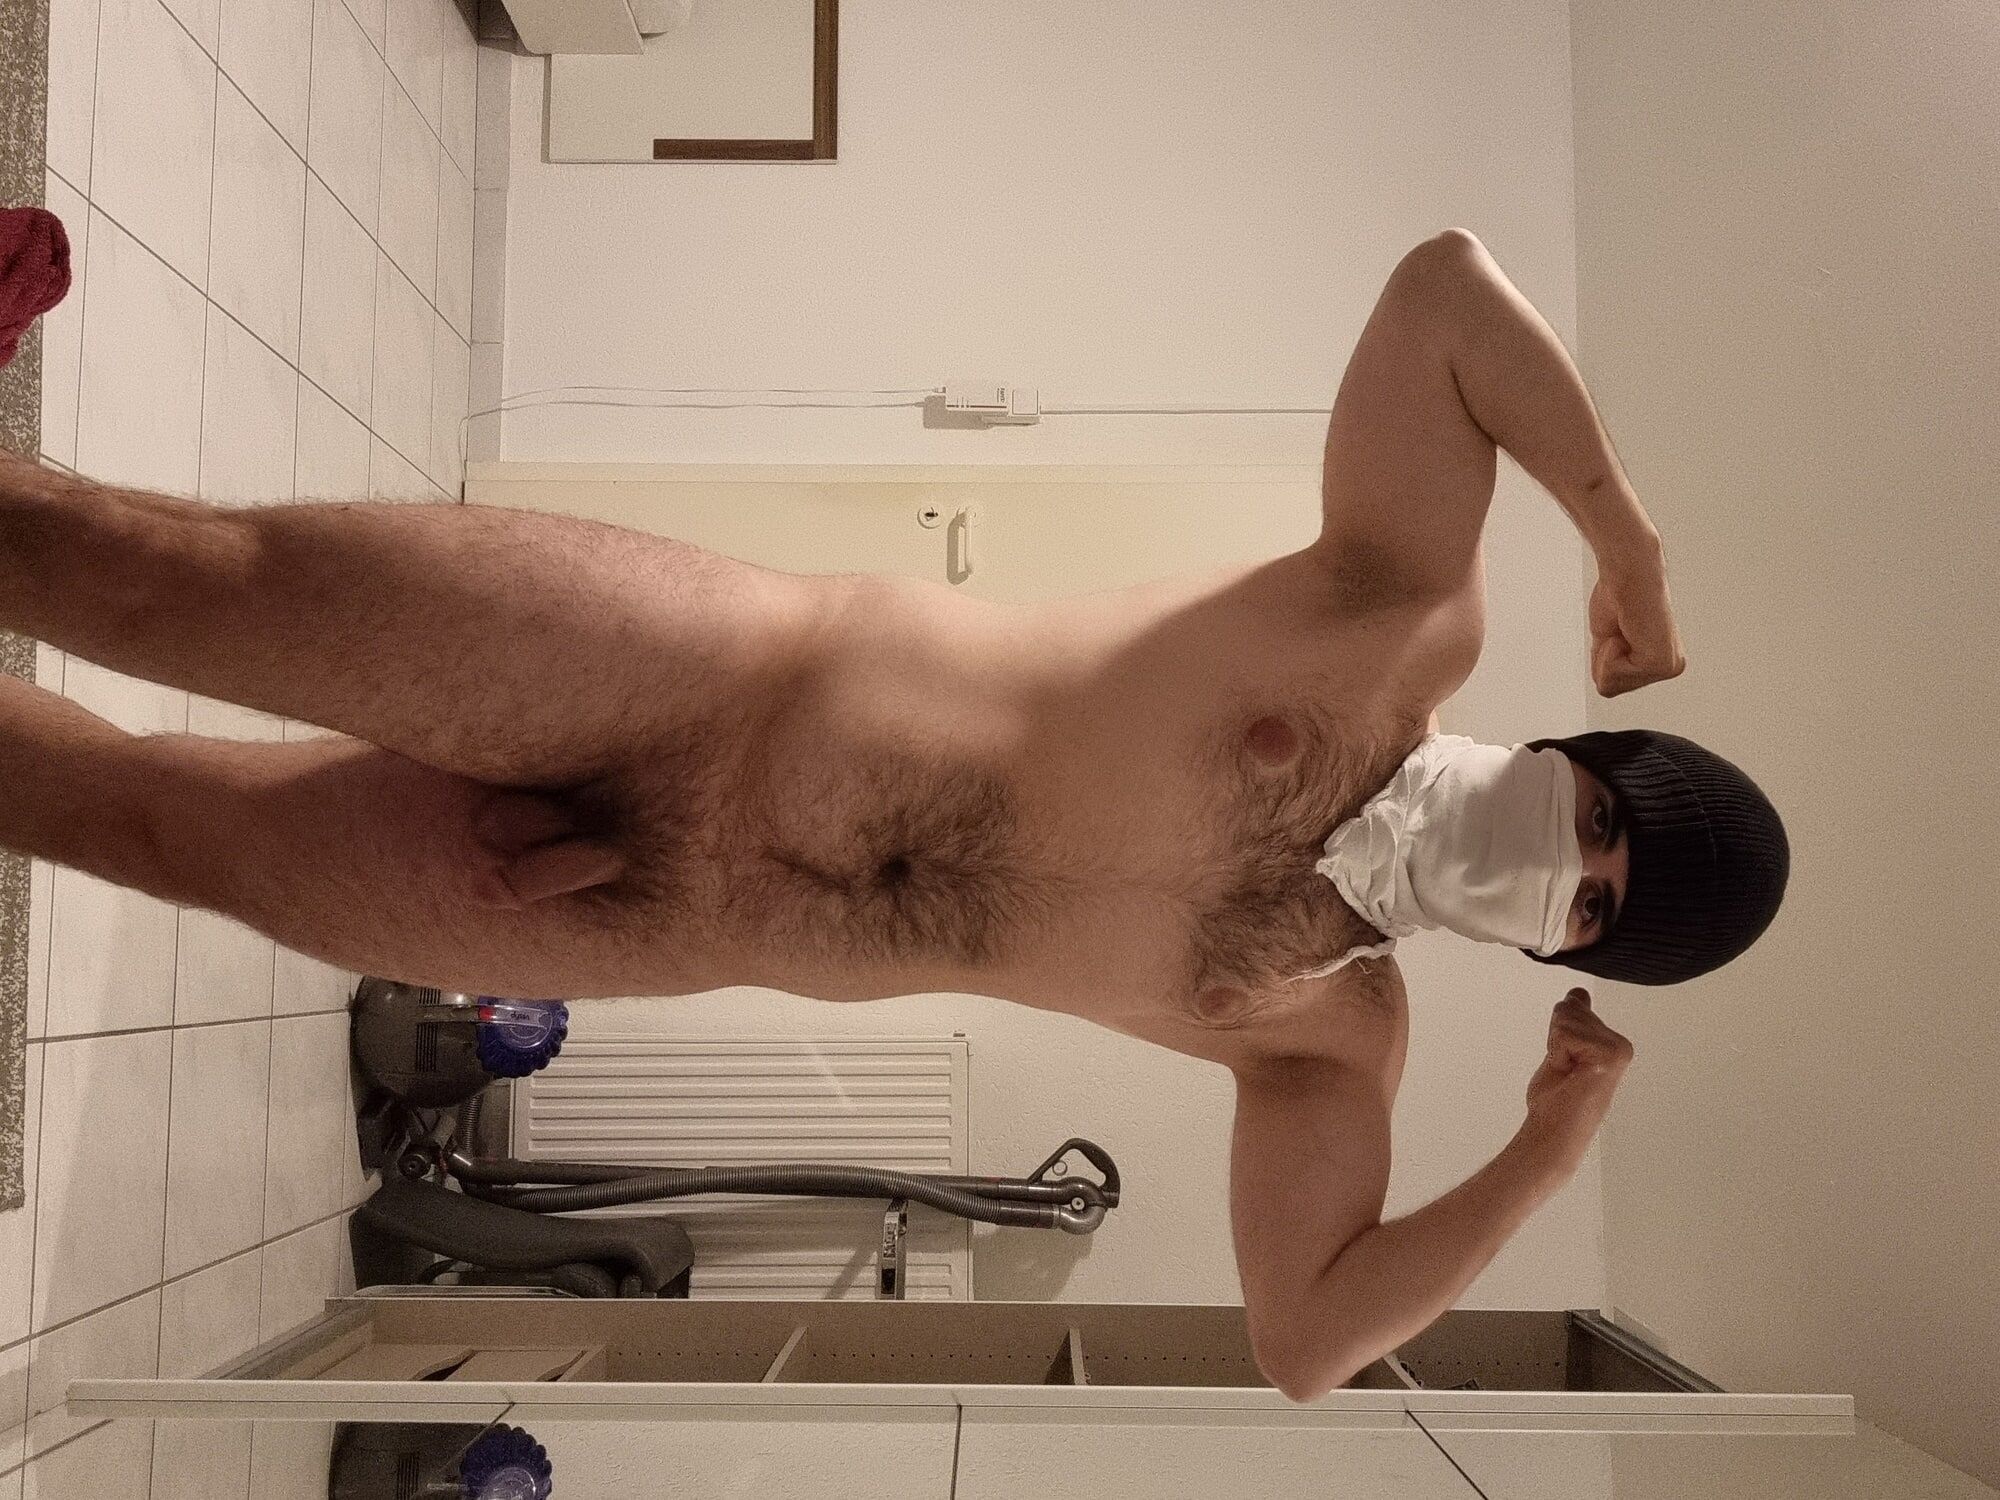 Masked Turk flexing, and showing his ass #2